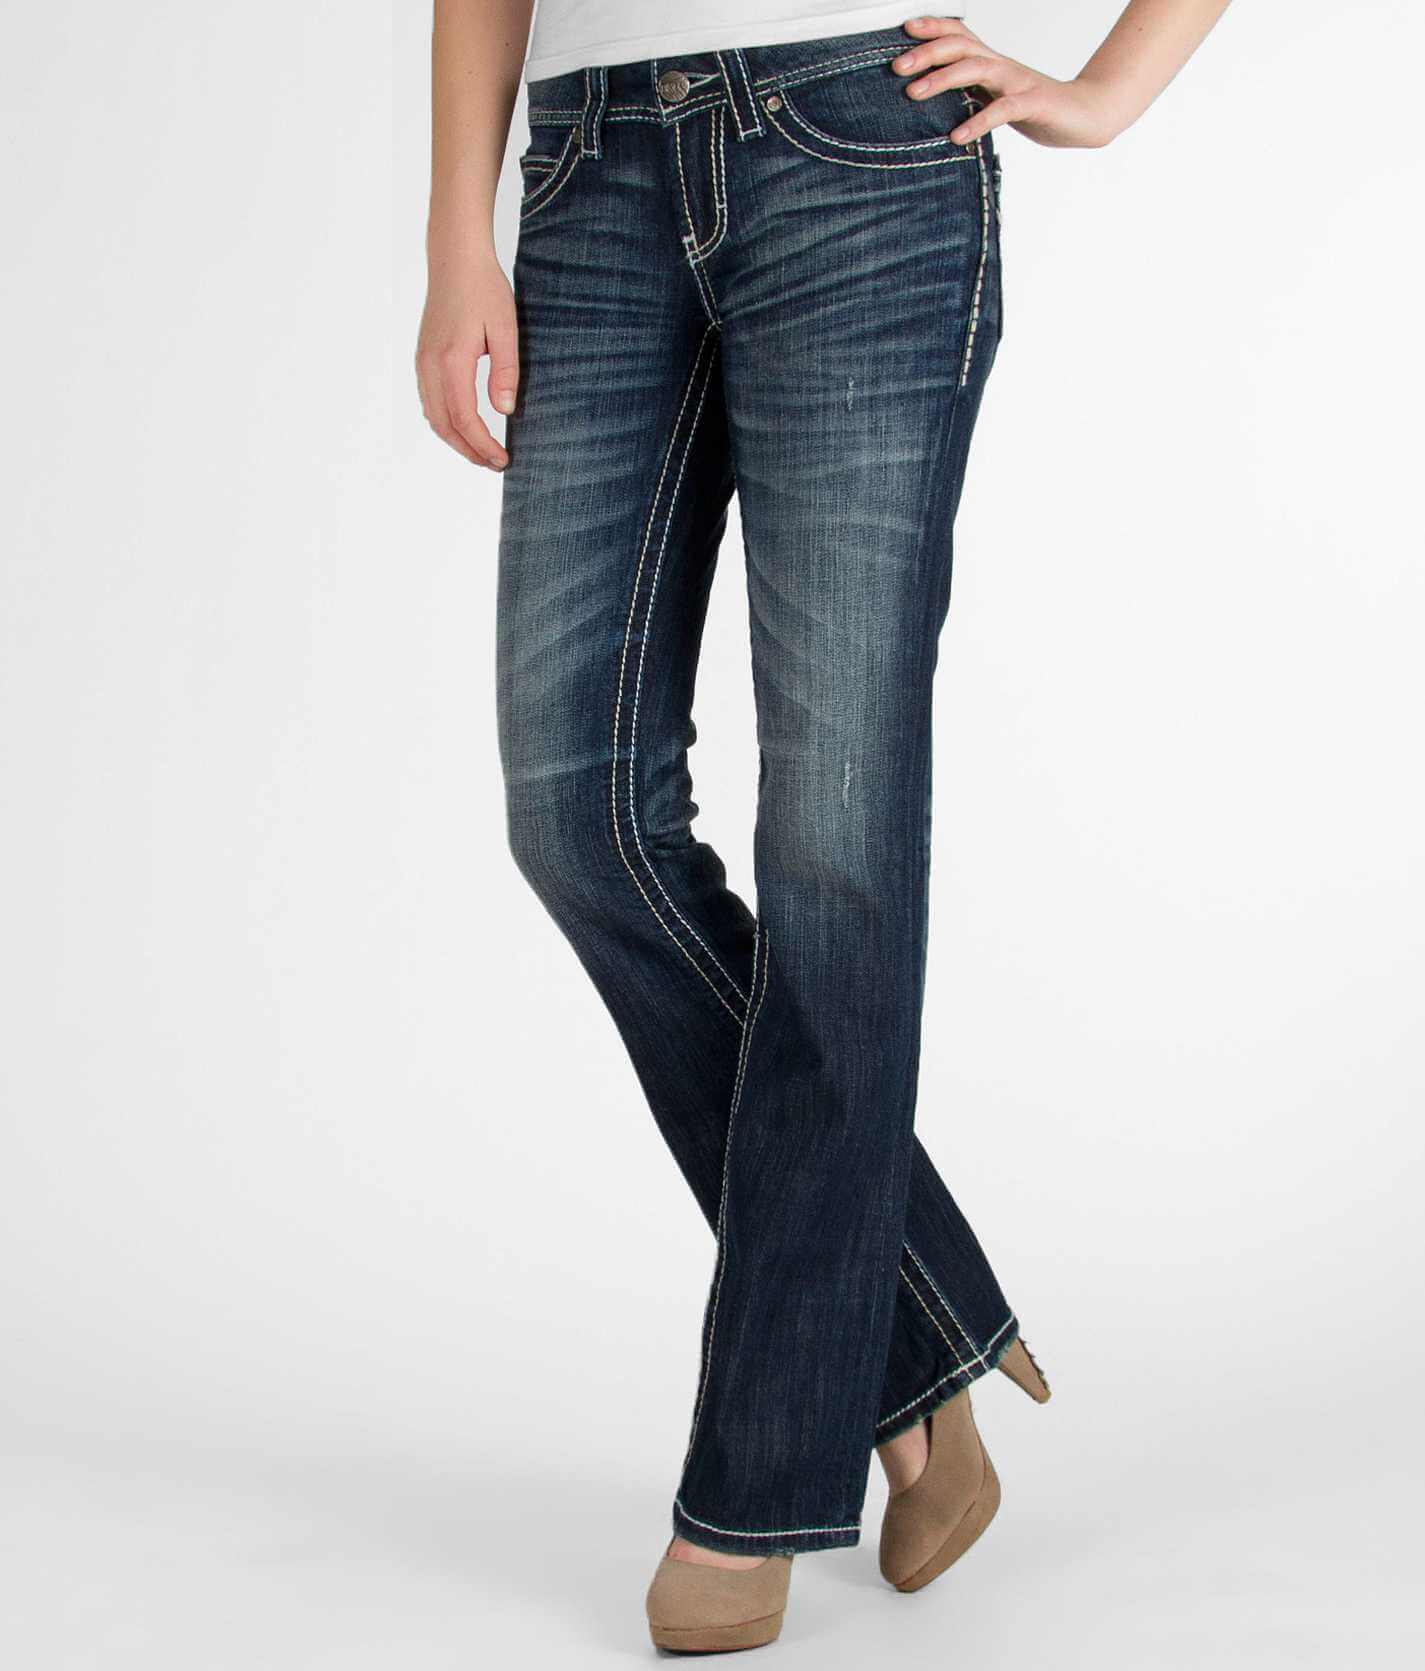 vintage style jeans womens